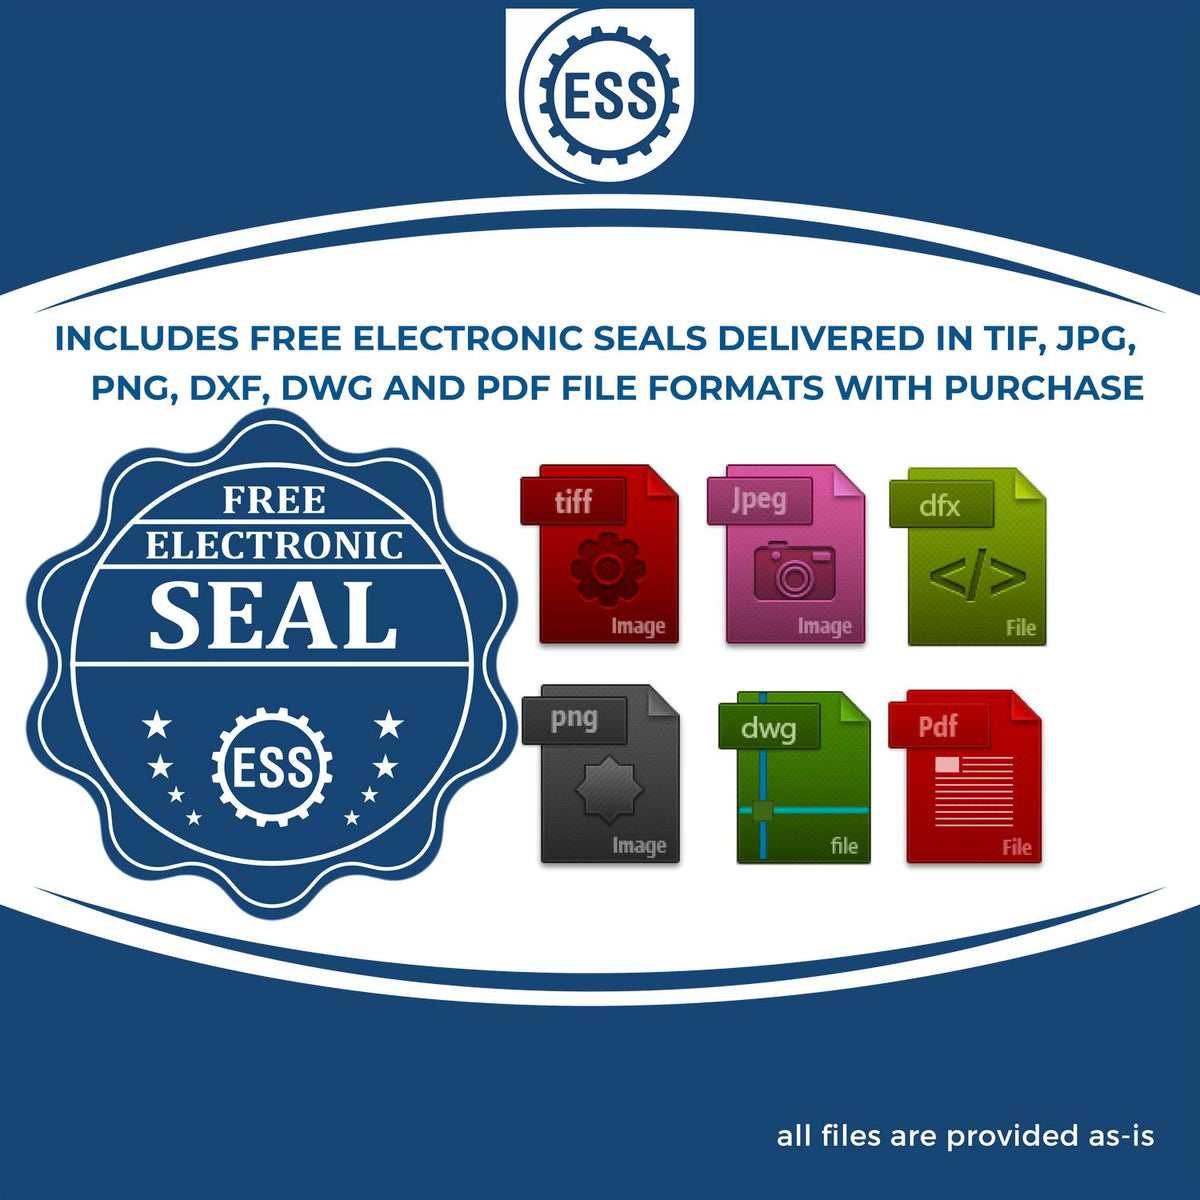 An infographic for the free electronic seal for the Gift North Carolina Engineer Seal illustrating the different file type icons such as DXF, DWG, TIF, JPG and PNG.